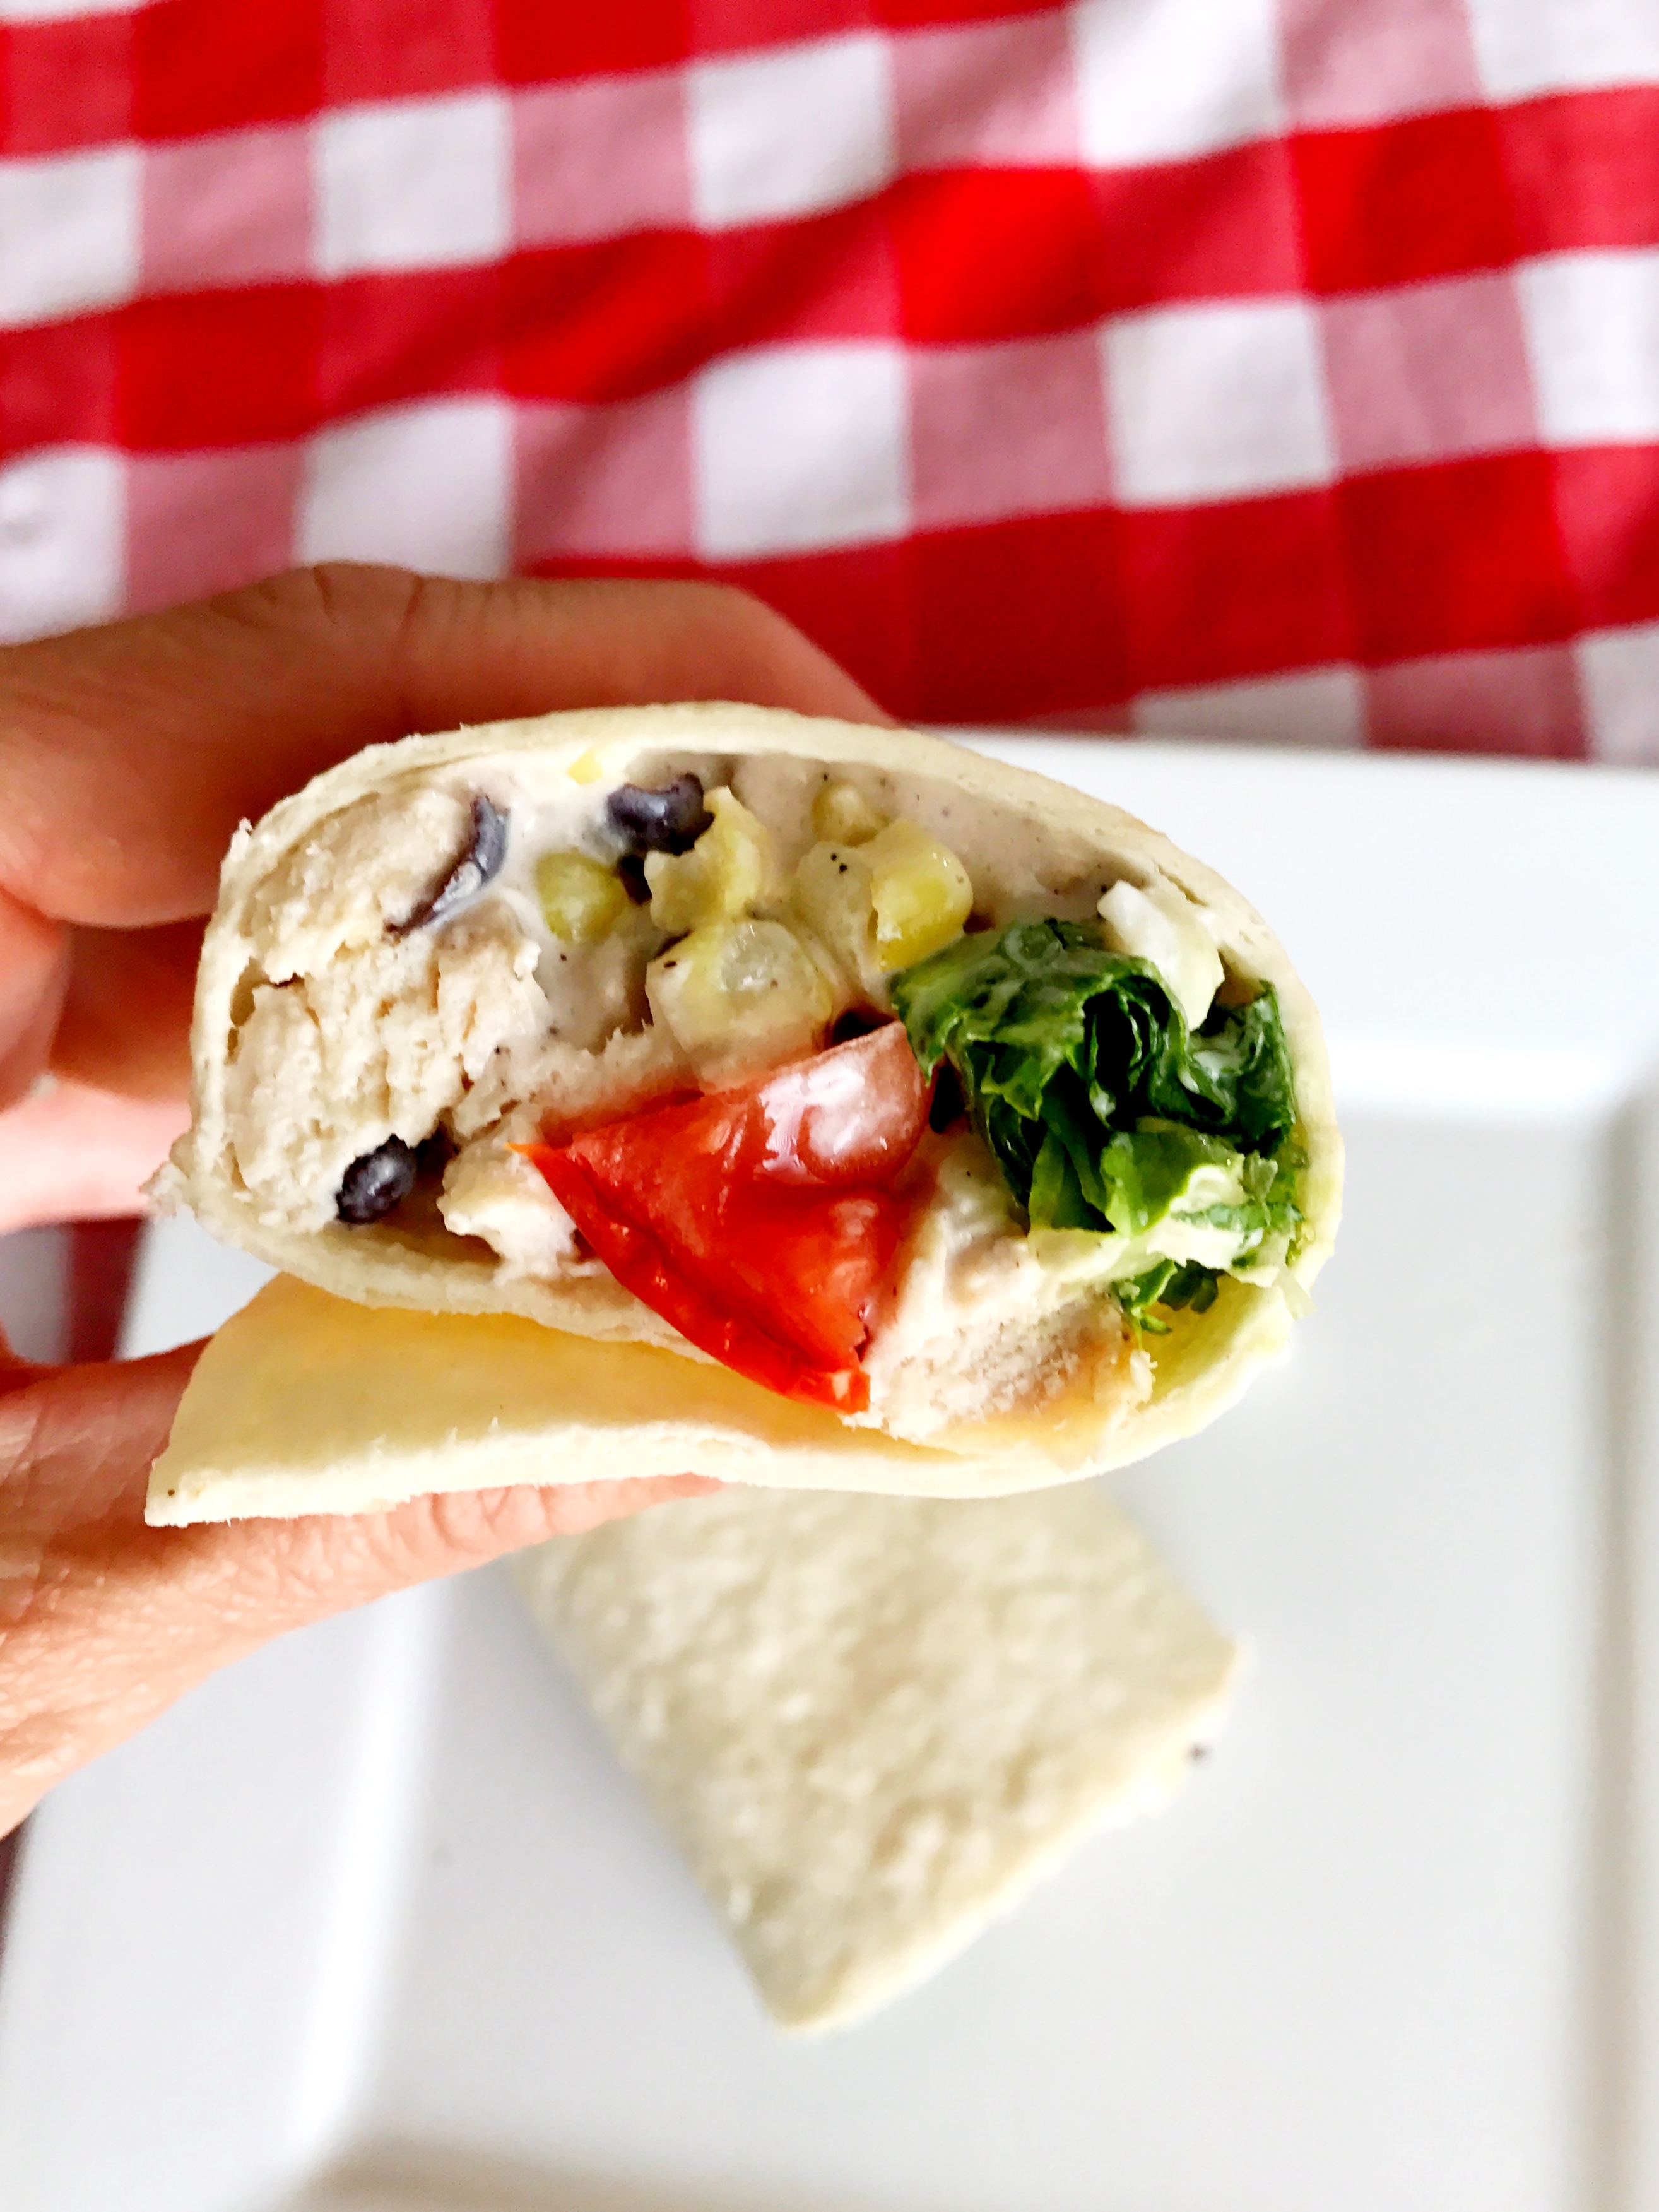 Santa Fe Chicken Salad Wraps - Together as Family